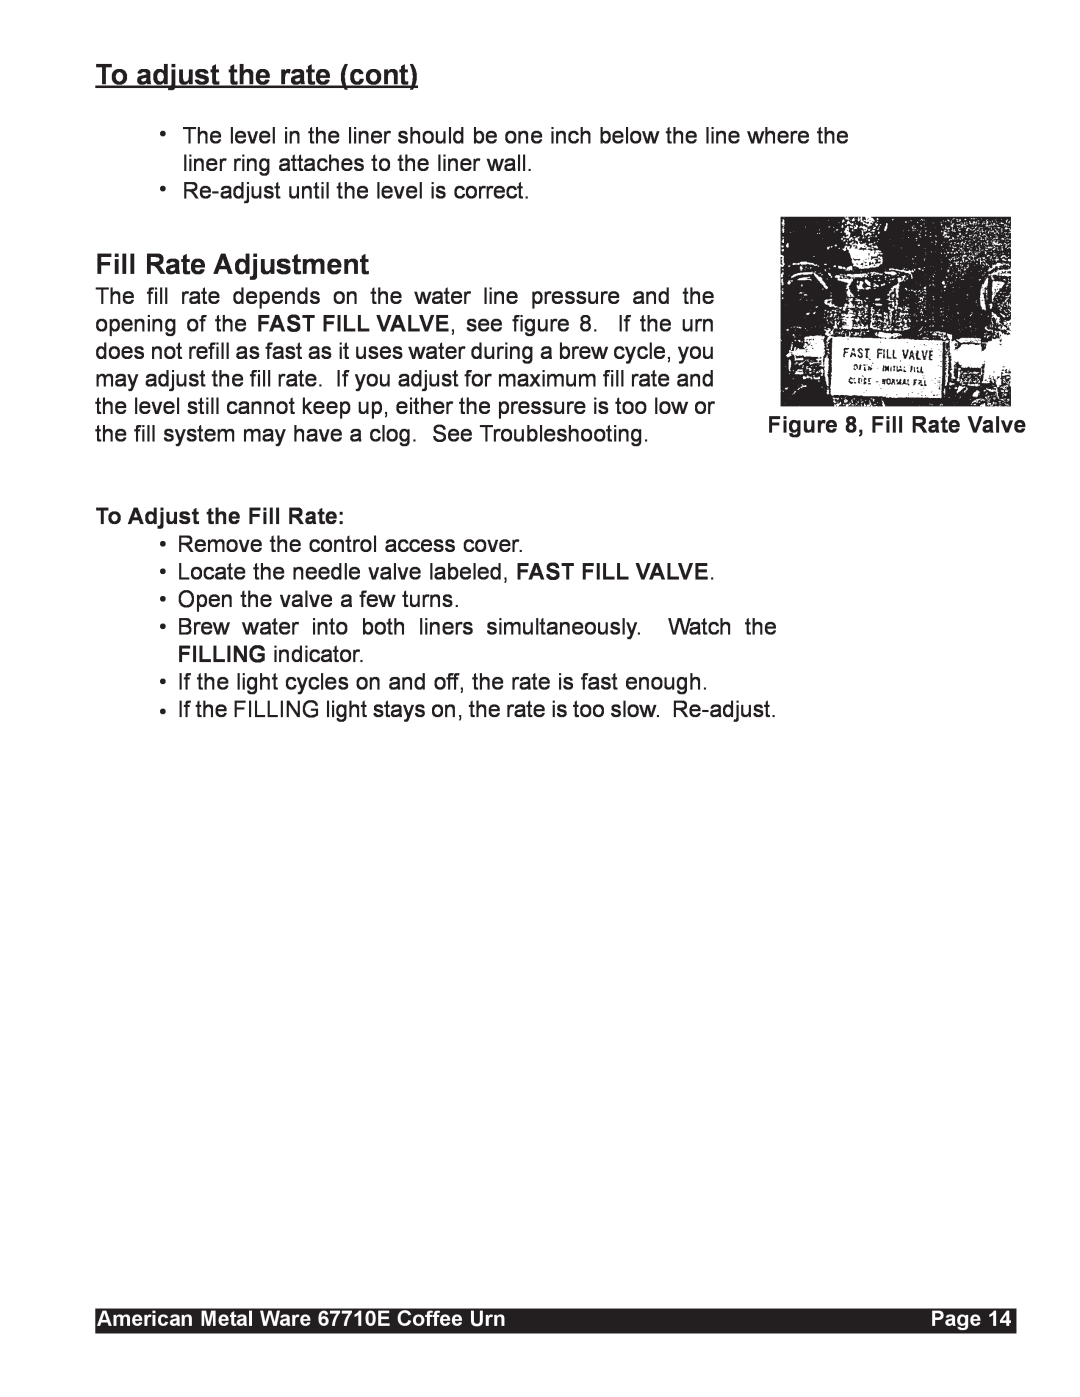 Grindmaster 67710E service manual To adjust the rate cont, Fill Rate Adjustment, Fill Rate Valve, To Adjust the Fill Rate 